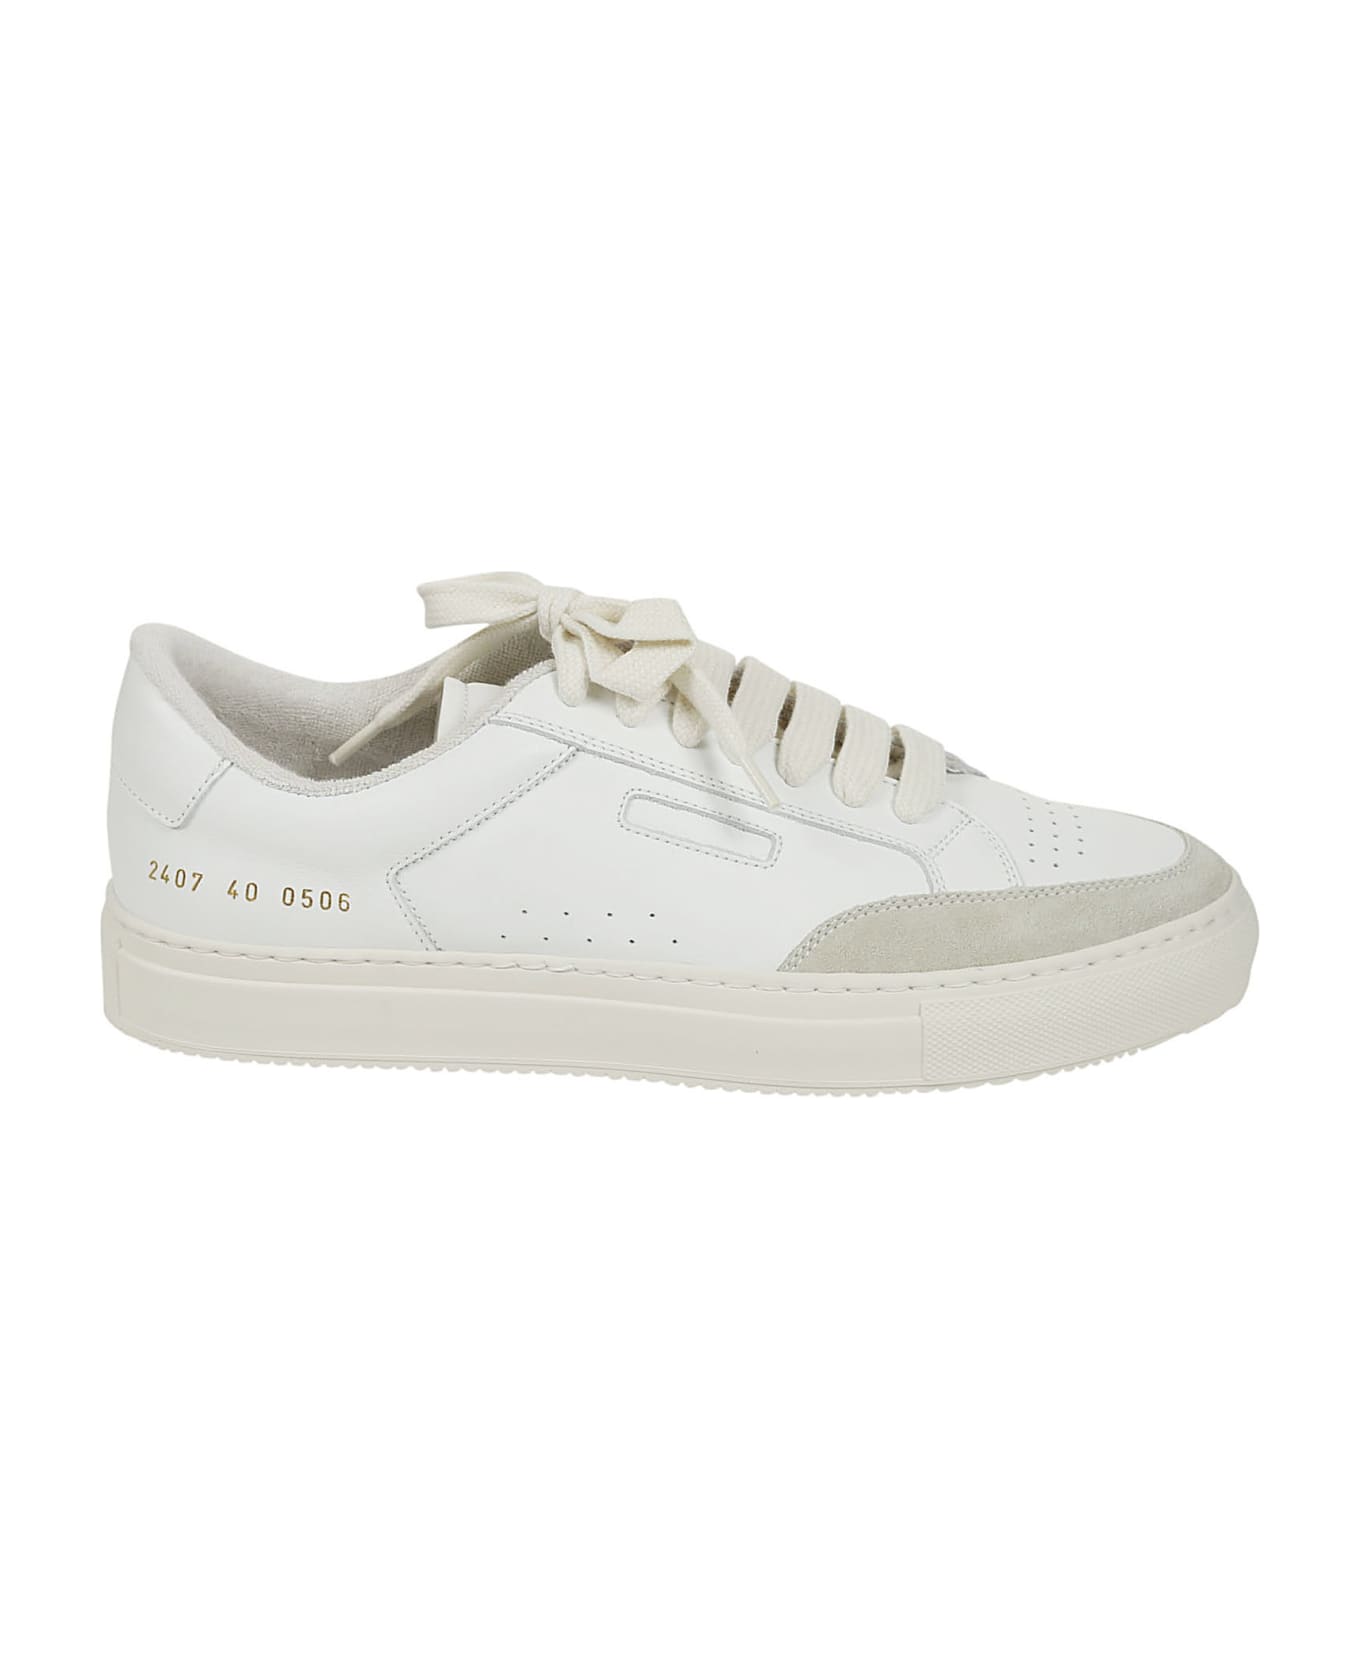 Common Projects Tennis Pro - White